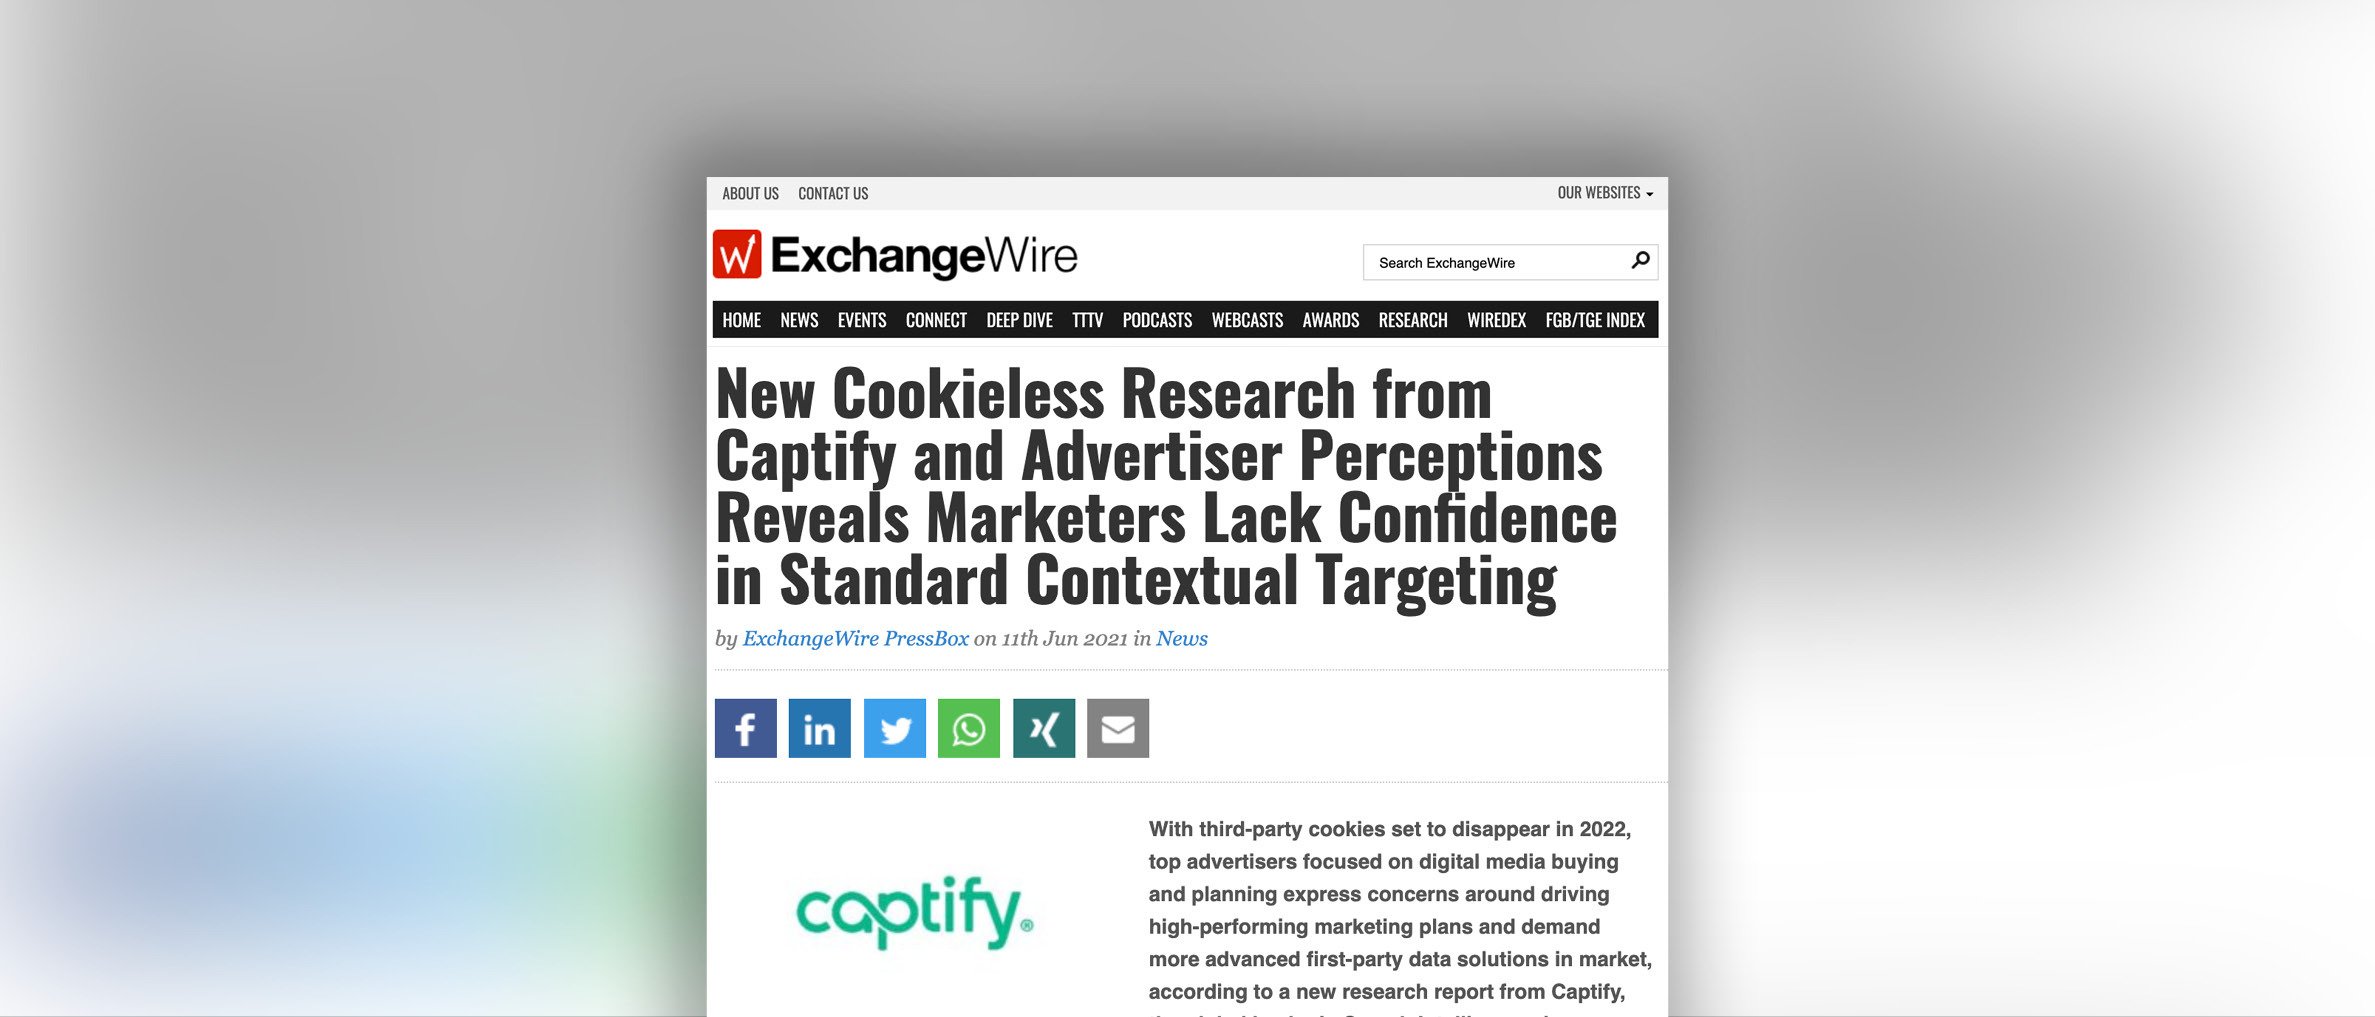 ExchangeWire: New Cookieless Research from Captify and Advertiser Perceptions Reveals Marketers Lack Confidence in Standard Contextual Targeting